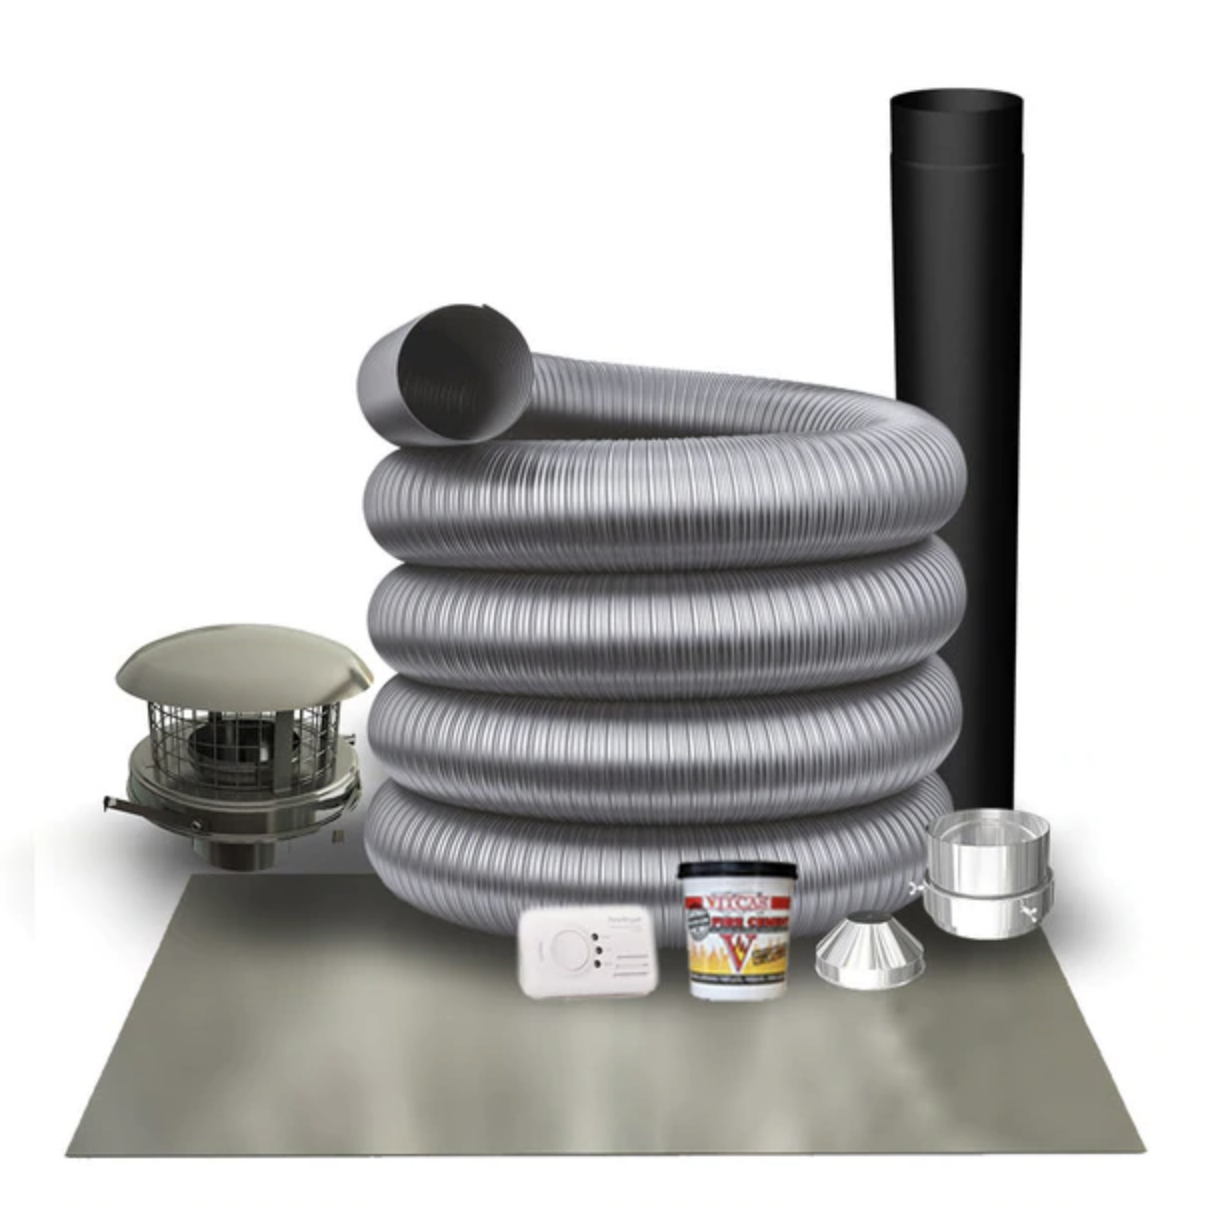 What Size Flue Do I Need for a Wood Stove? - Trade Price Flues